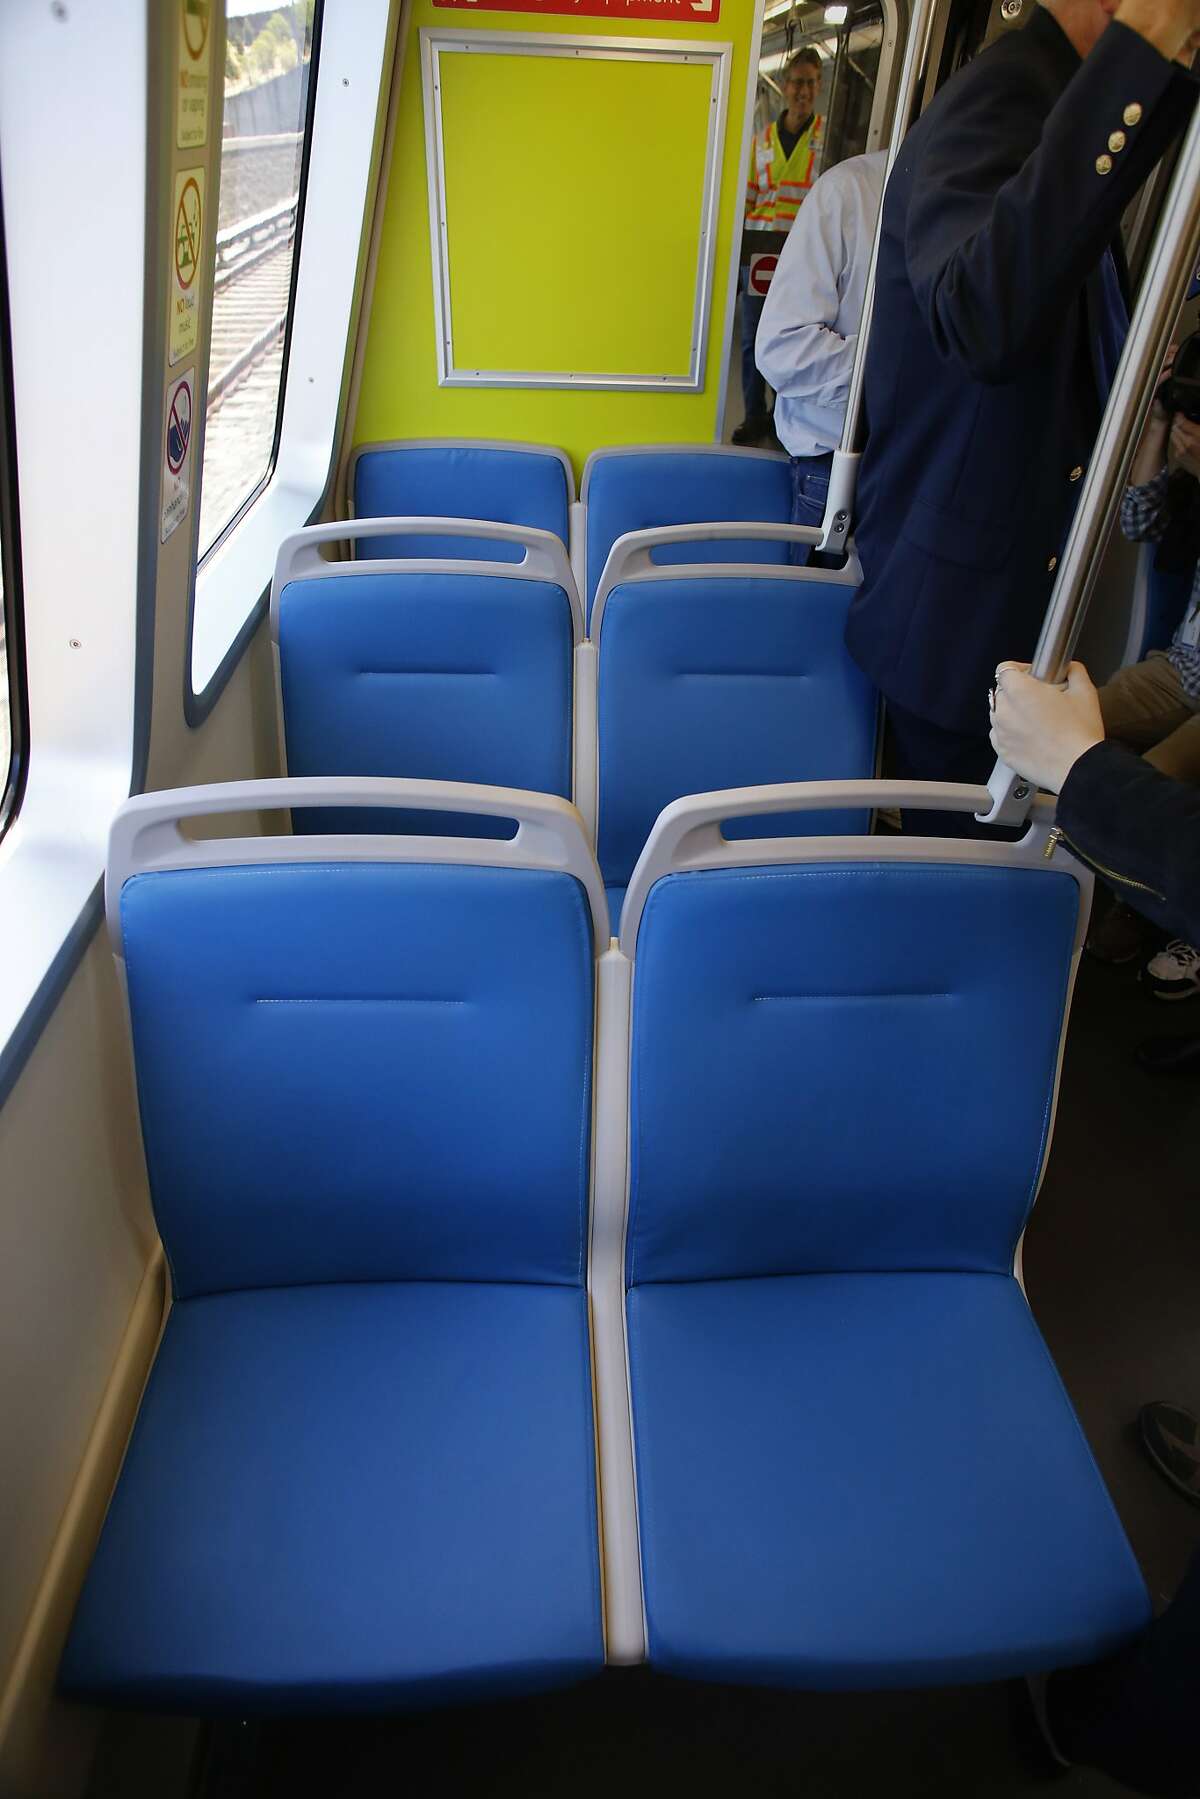 BART shows off one of their new train cars during a demonstration run at the South Hayward station, Ca., as seen on Mon. July 23, 2017. The new seats are said to be easier to keep clean.